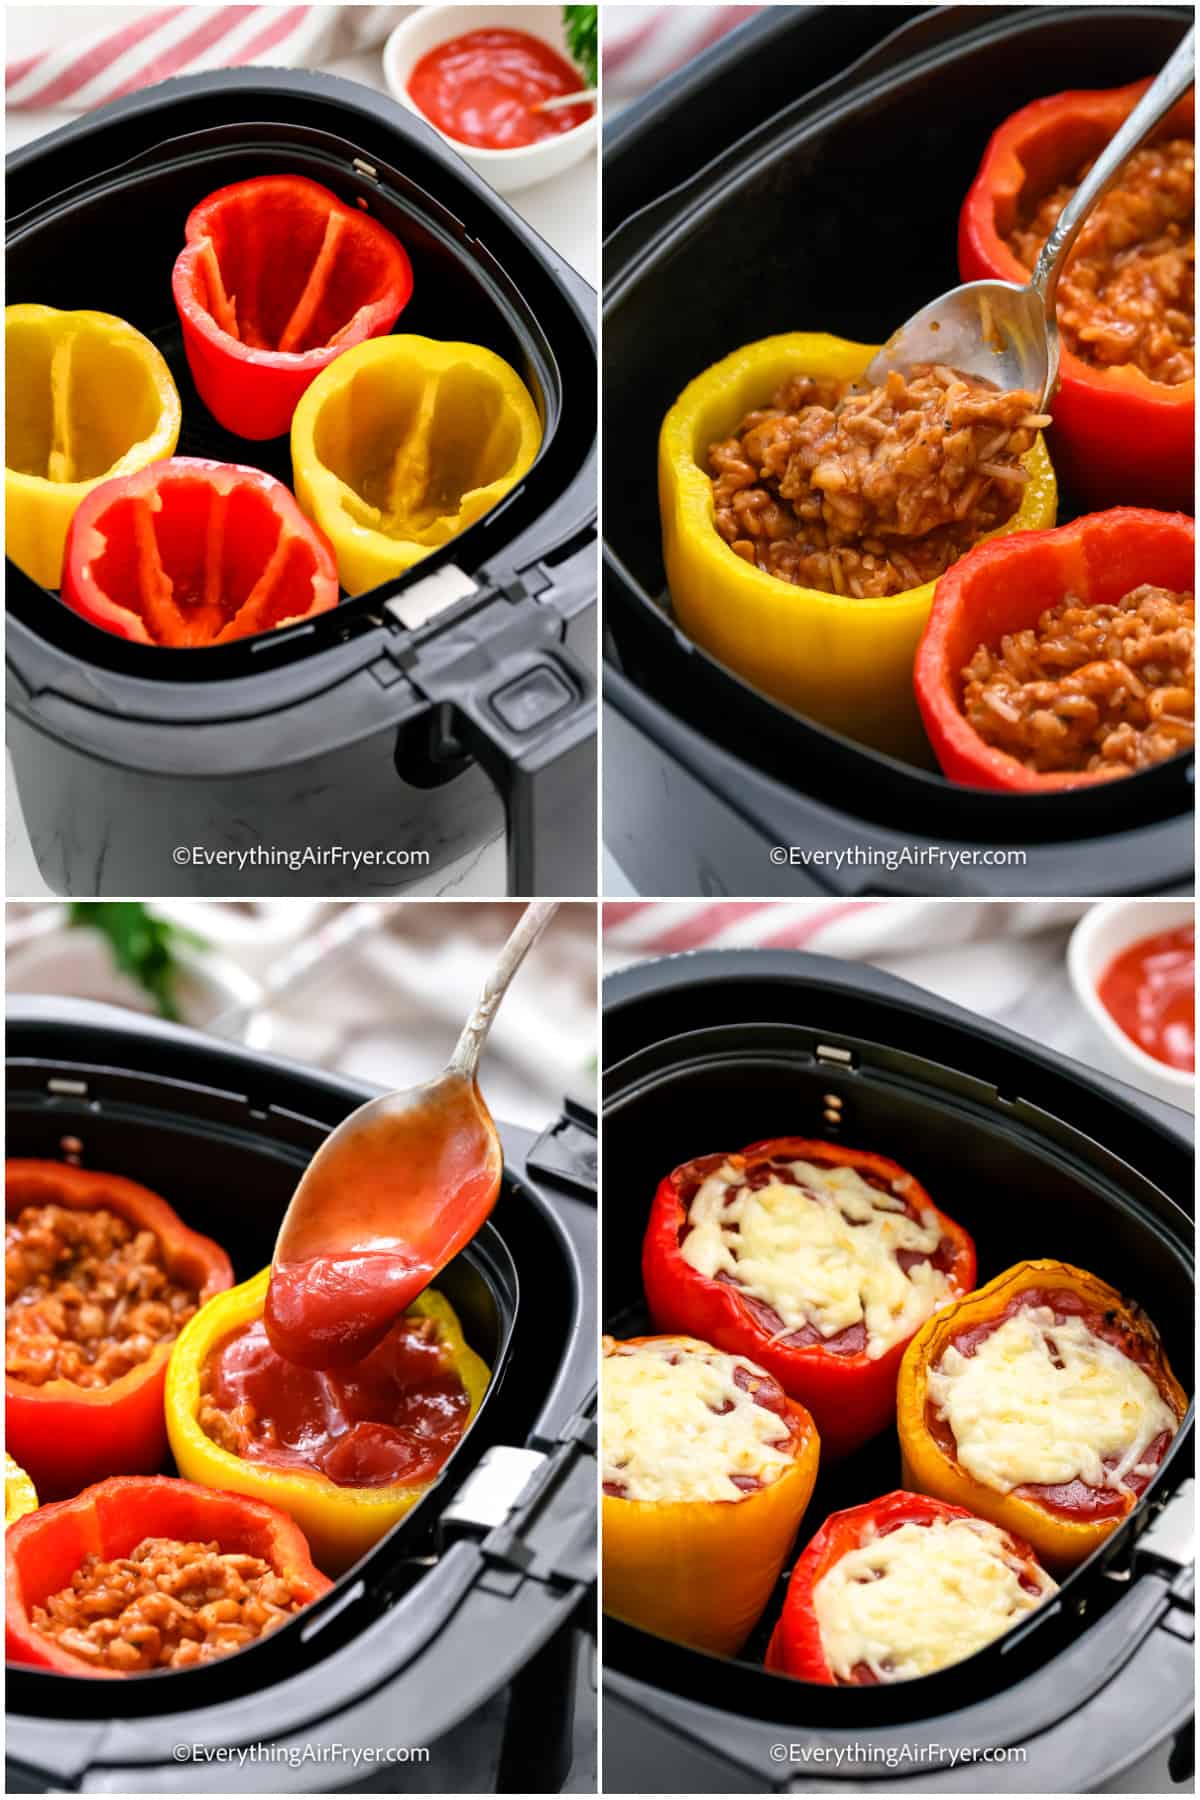 process of filling stuffed peppers